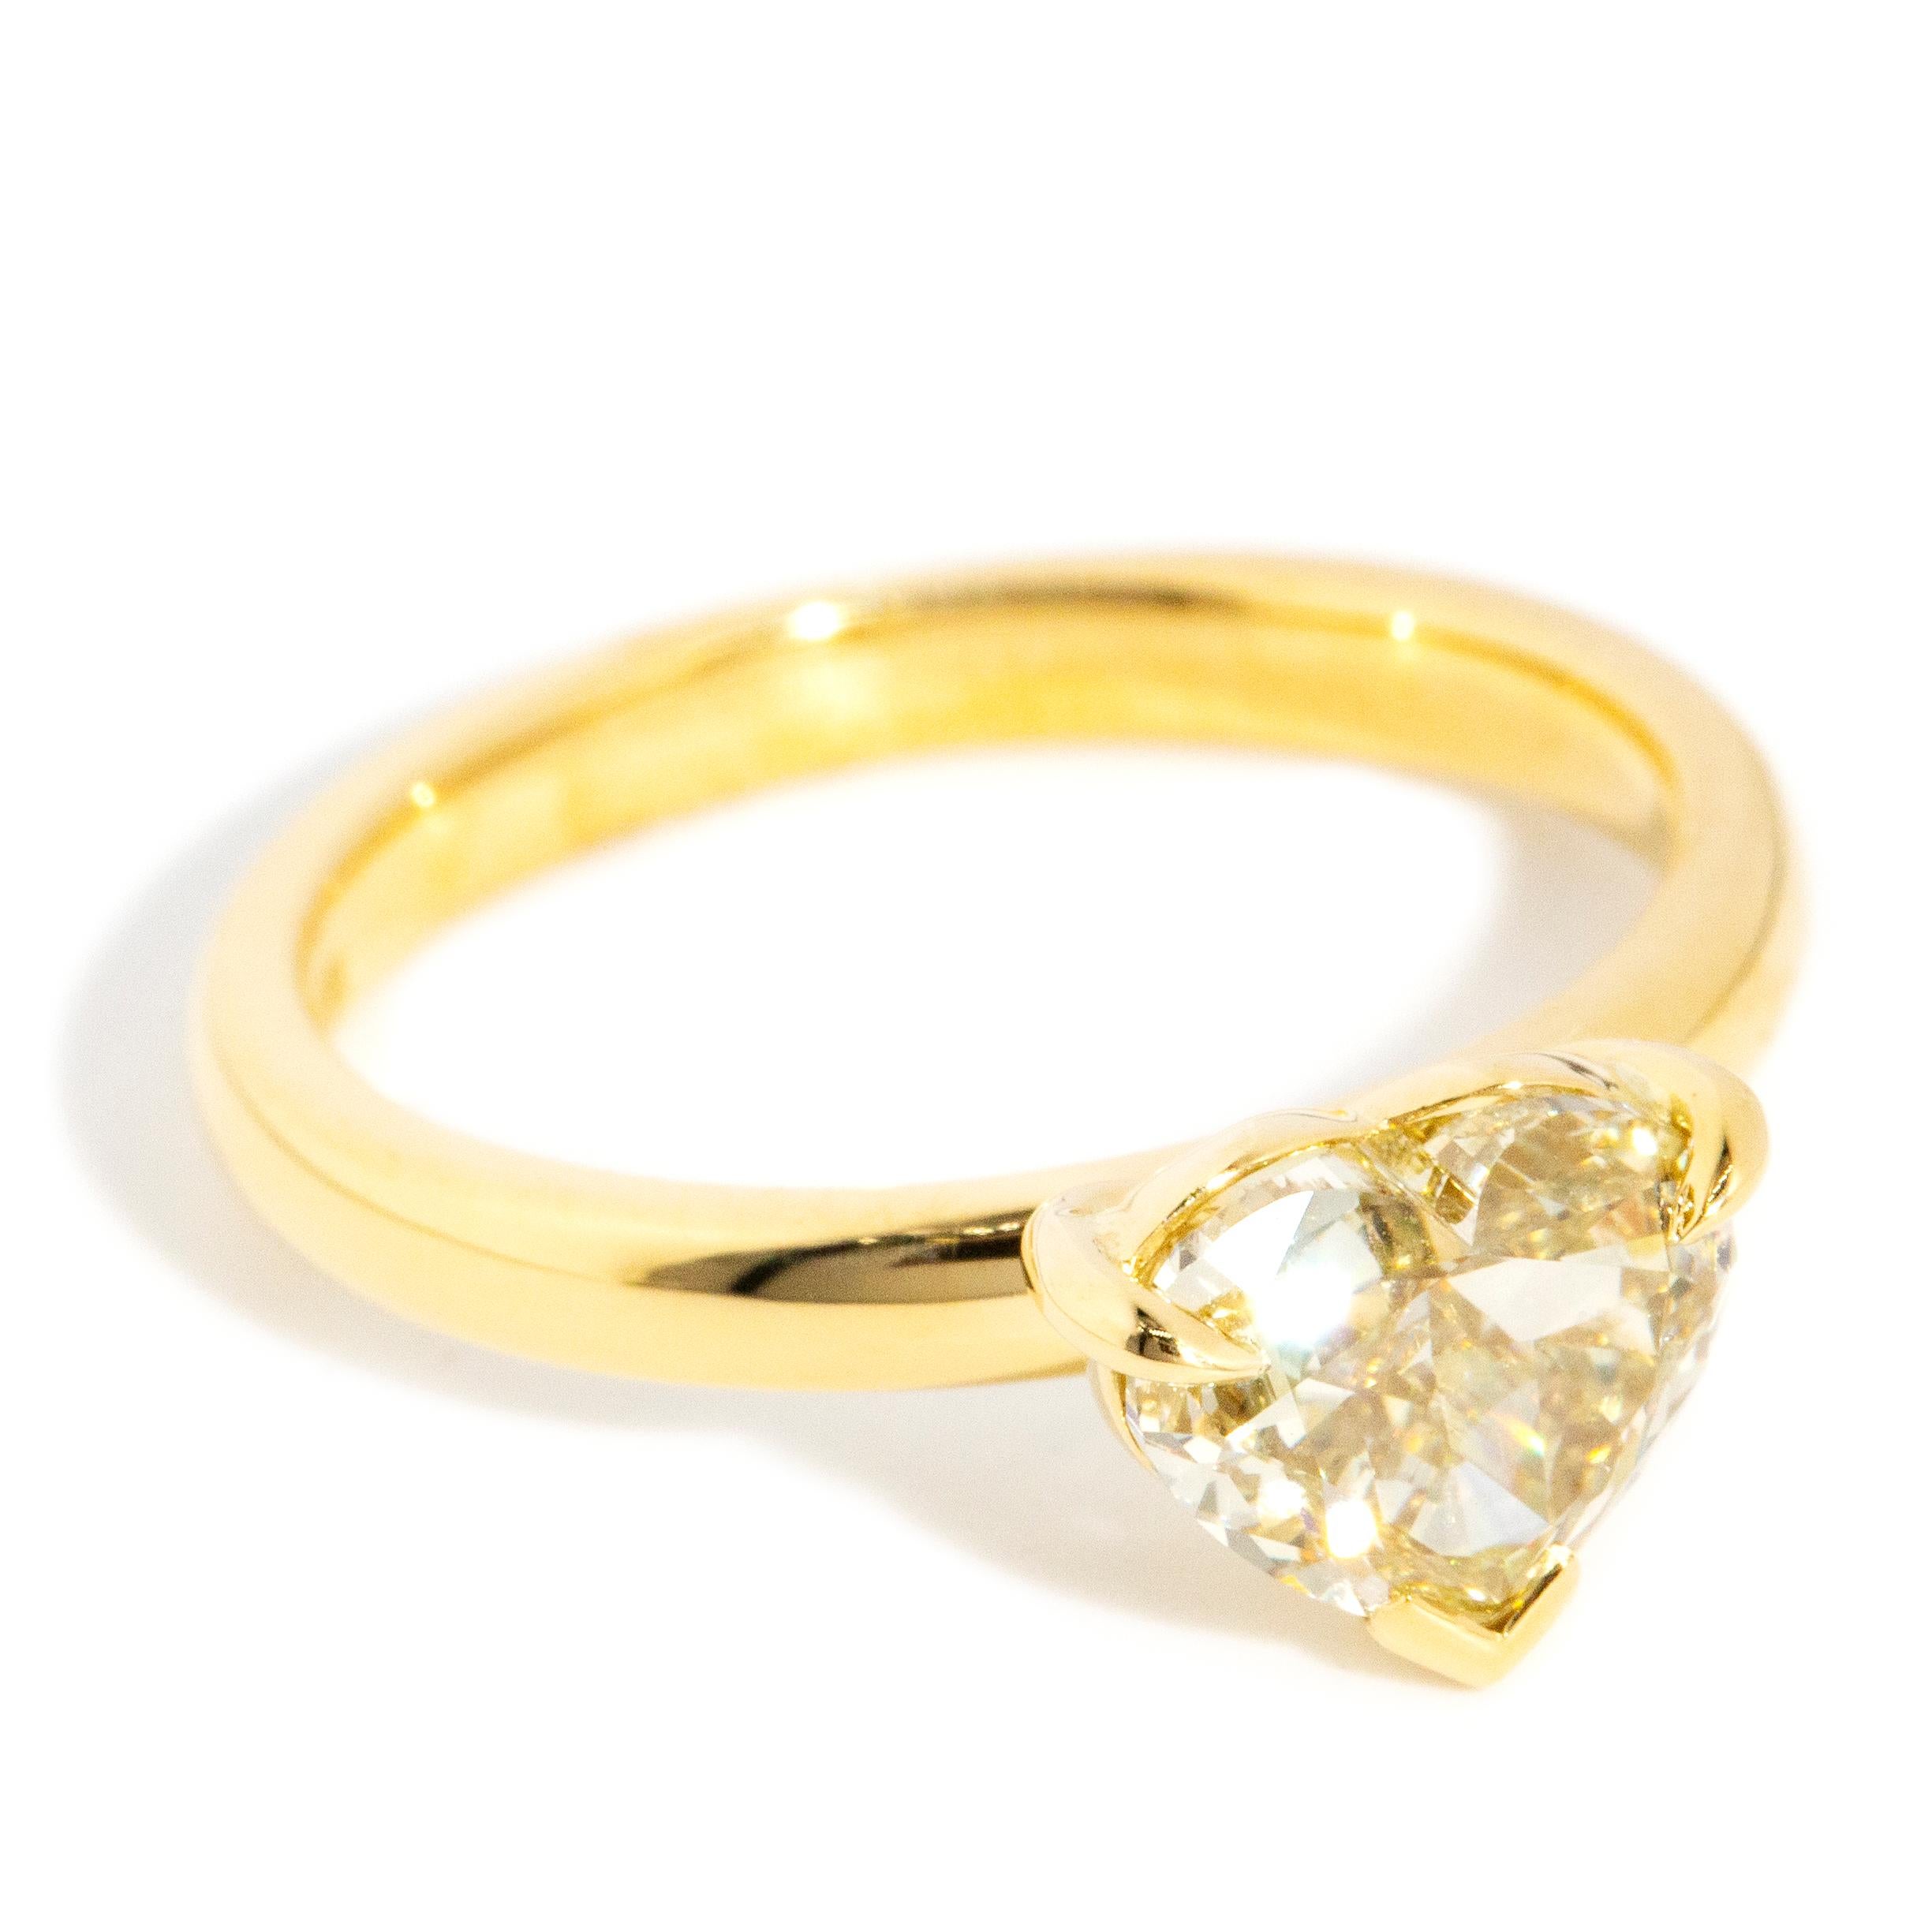 Contemporary 1.80 Carat Light Fancy Yellow Heart Cut Diamond Ring 18 Carat Gold In New Condition For Sale In Hamilton, AU